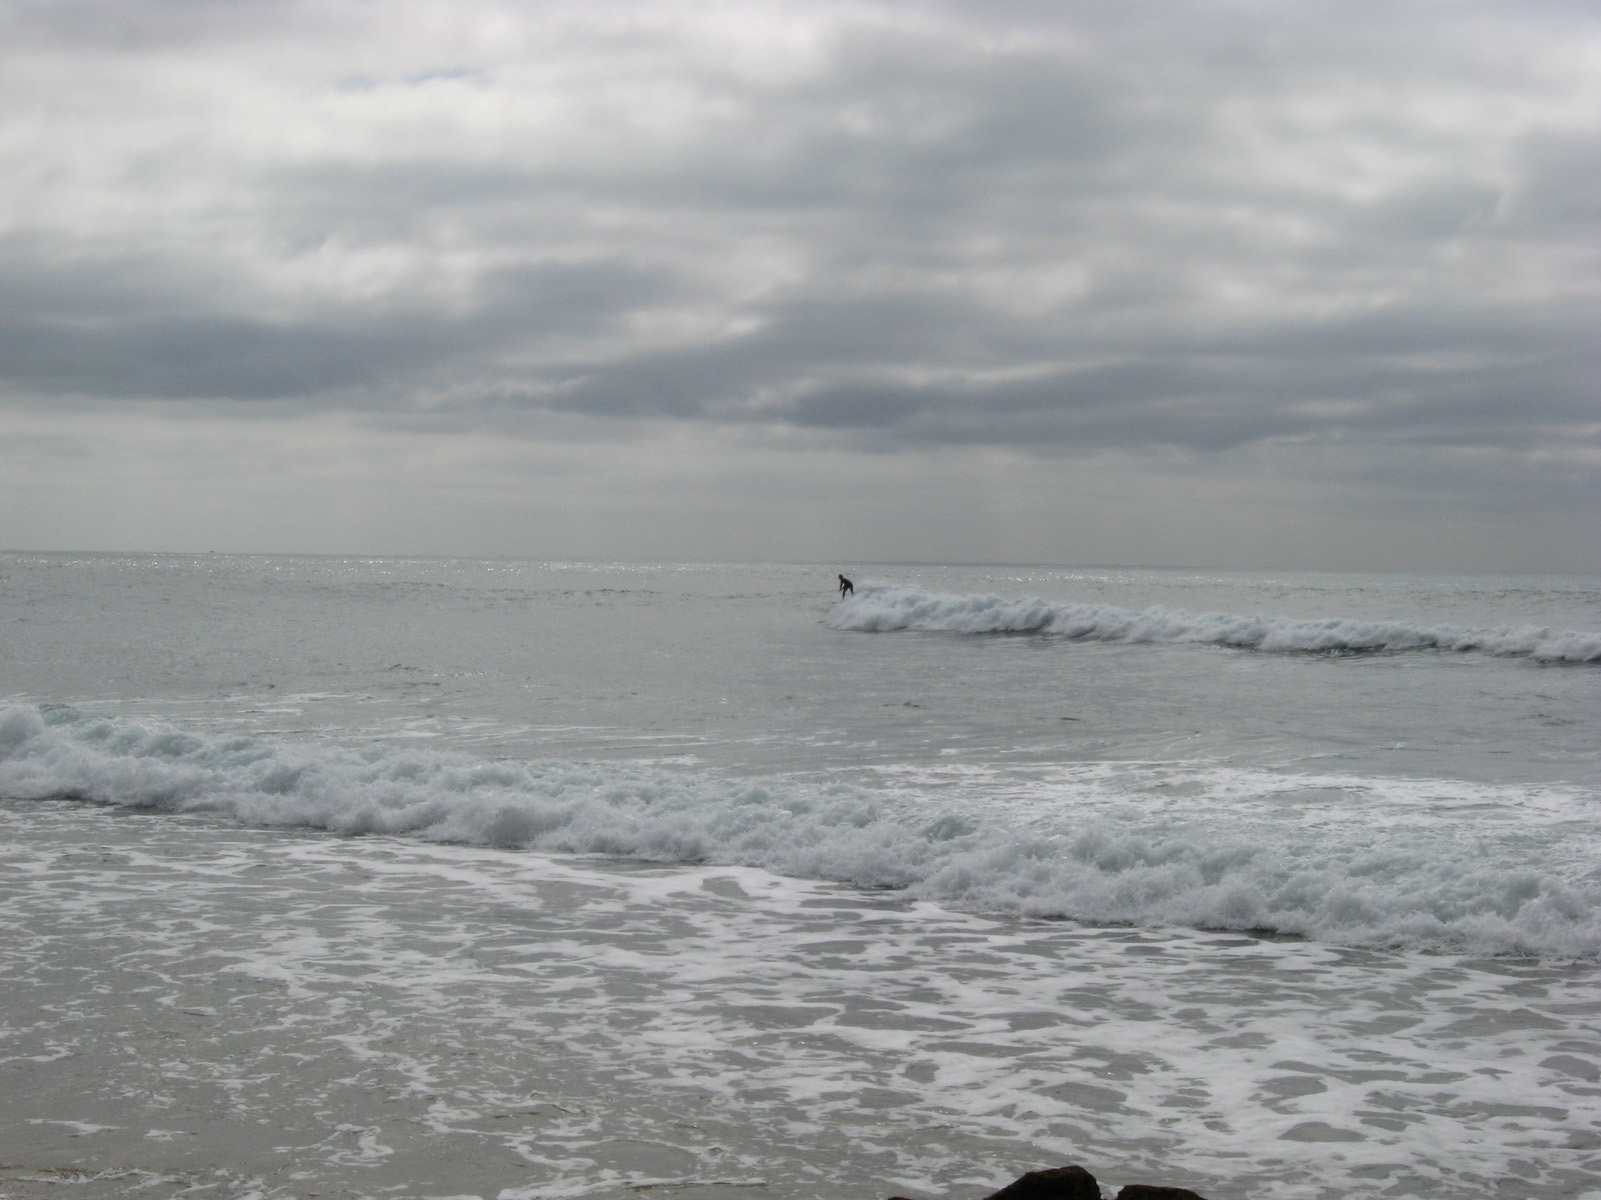 I am no expert, but the waves seem small for surfing..